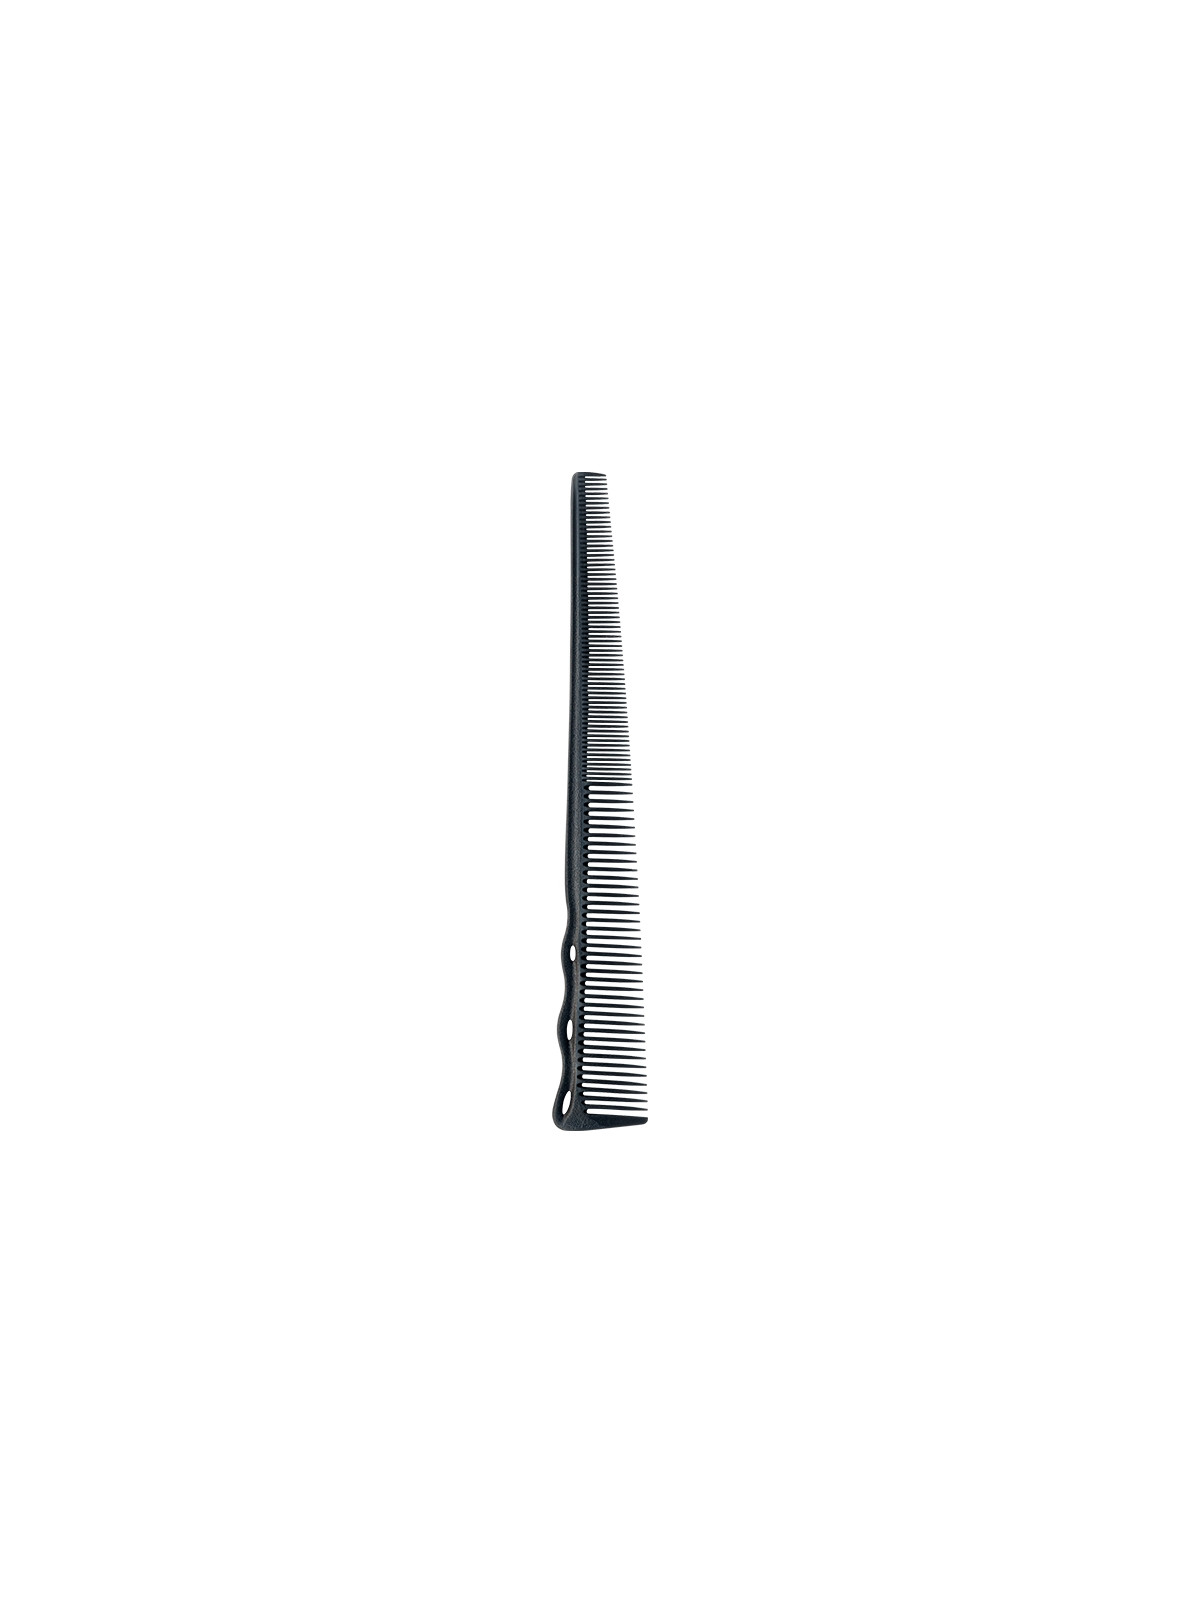 Y.S. Park 254 Super Tapered Flexible Cutting Comb 187mm